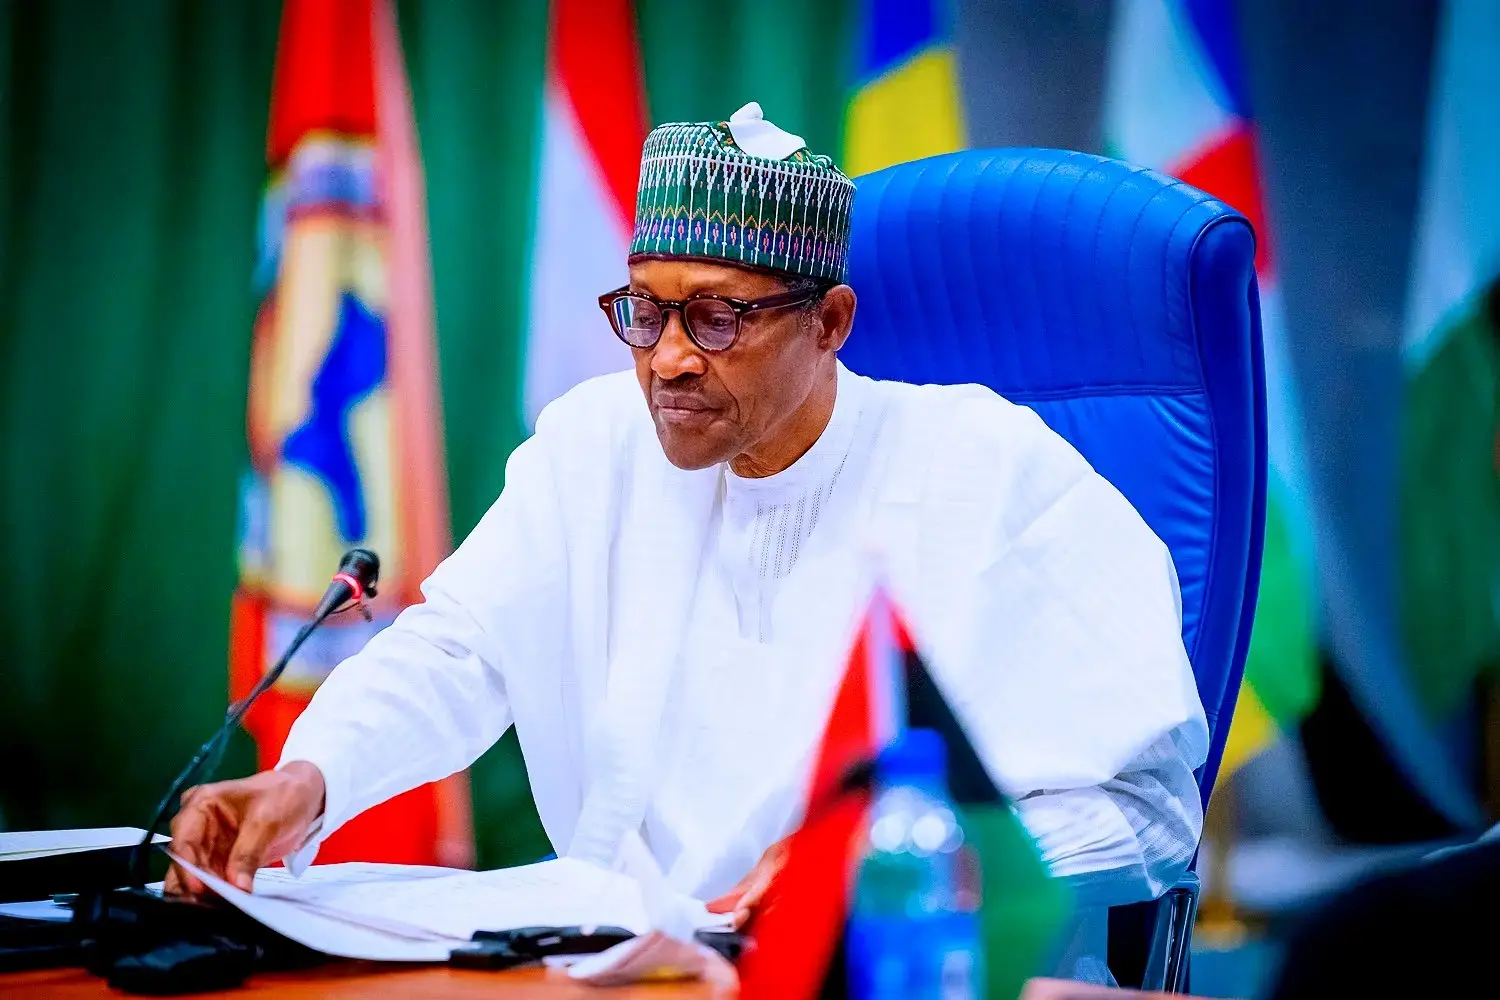 Seplat’s acquisition of Exxon Mobil’s Nigeria unit has been approved by Nigerian President Muhammadu Buhari.